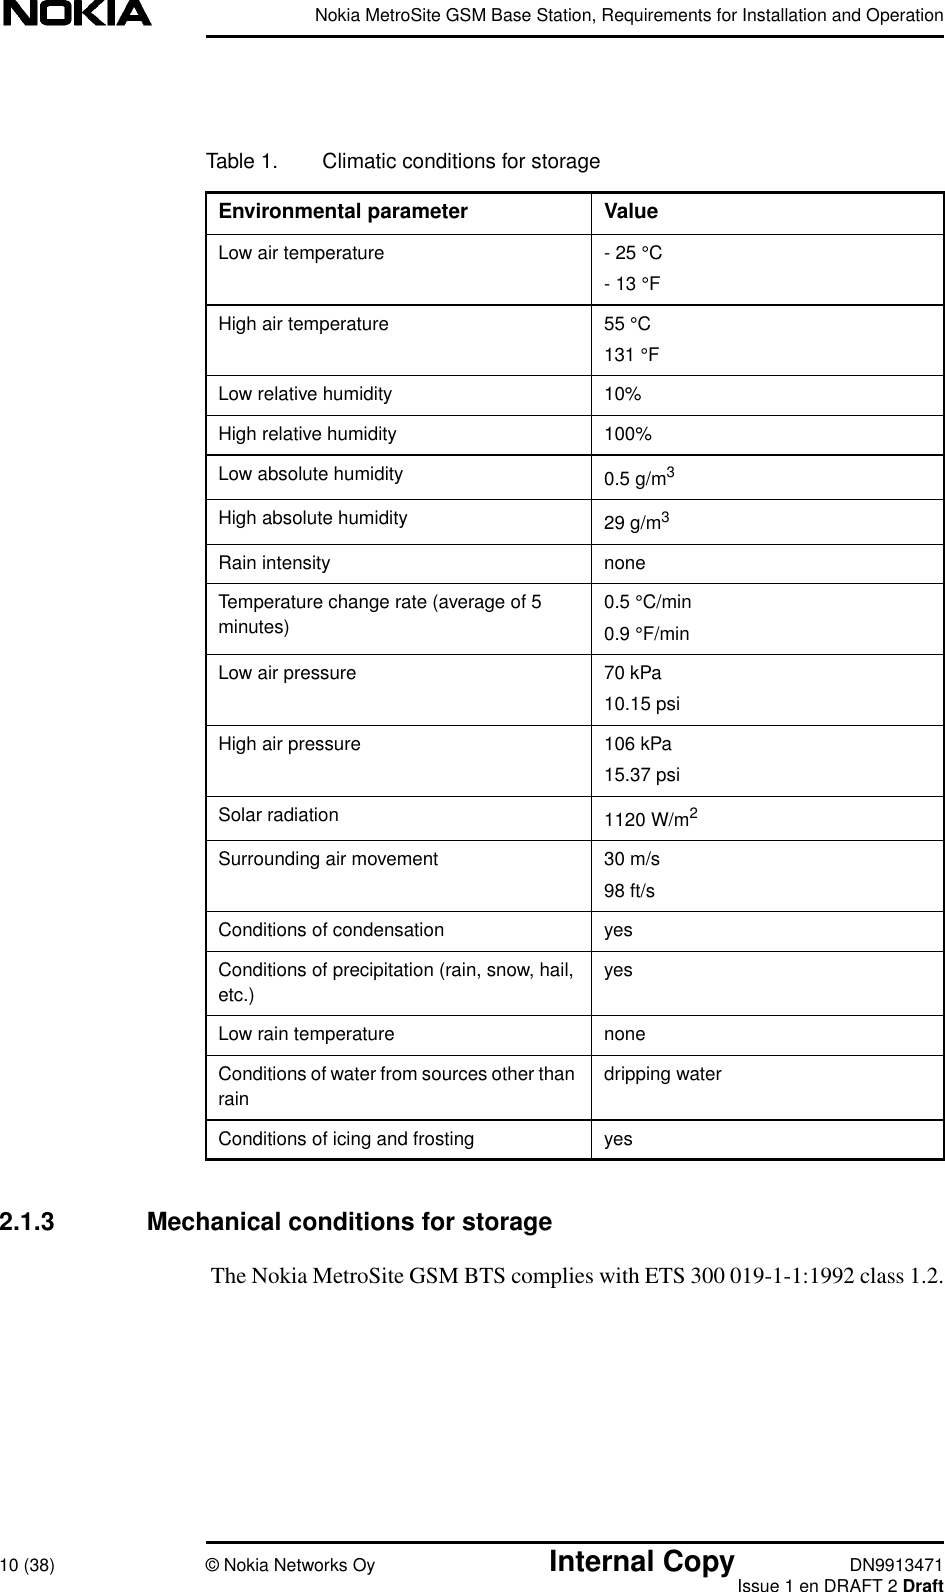 Nokia MetroSite GSM Base Station, Requirements for Installation and Operation10 (38) © Nokia Networks Oy Internal Copy DN9913471Issue 1 en DRAFT 2 Draft2.1.3 Mechanical conditions for storageThe Nokia MetroSite GSM BTS complies with ETS 300 019-1-1:1992 class 1.2.Table 1. Climatic conditions for storageEnvironmental parameter ValueLow air temperature - 25 °C- 13 °FHigh air temperature 55 °C131 °FLow relative humidity 10%High relative humidity 100%Low absolute humidity 0.5 g/m3High absolute humidity 29 g/m3Rain intensity noneTemperature change rate (average of 5minutes)0.5 °C/min0.9 °F/minLow air pressure 70 kPa10.15 psiHigh air pressure 106 kPa15.37 psiSolar radiation 1120 W/m2Surrounding air movement 30 m/s98 ft/sConditions of condensation yesConditions of precipitation (rain, snow, hail,etc.)yesLow rain temperature noneConditions of water from sources other thanraindripping waterConditions of icing and frosting yes